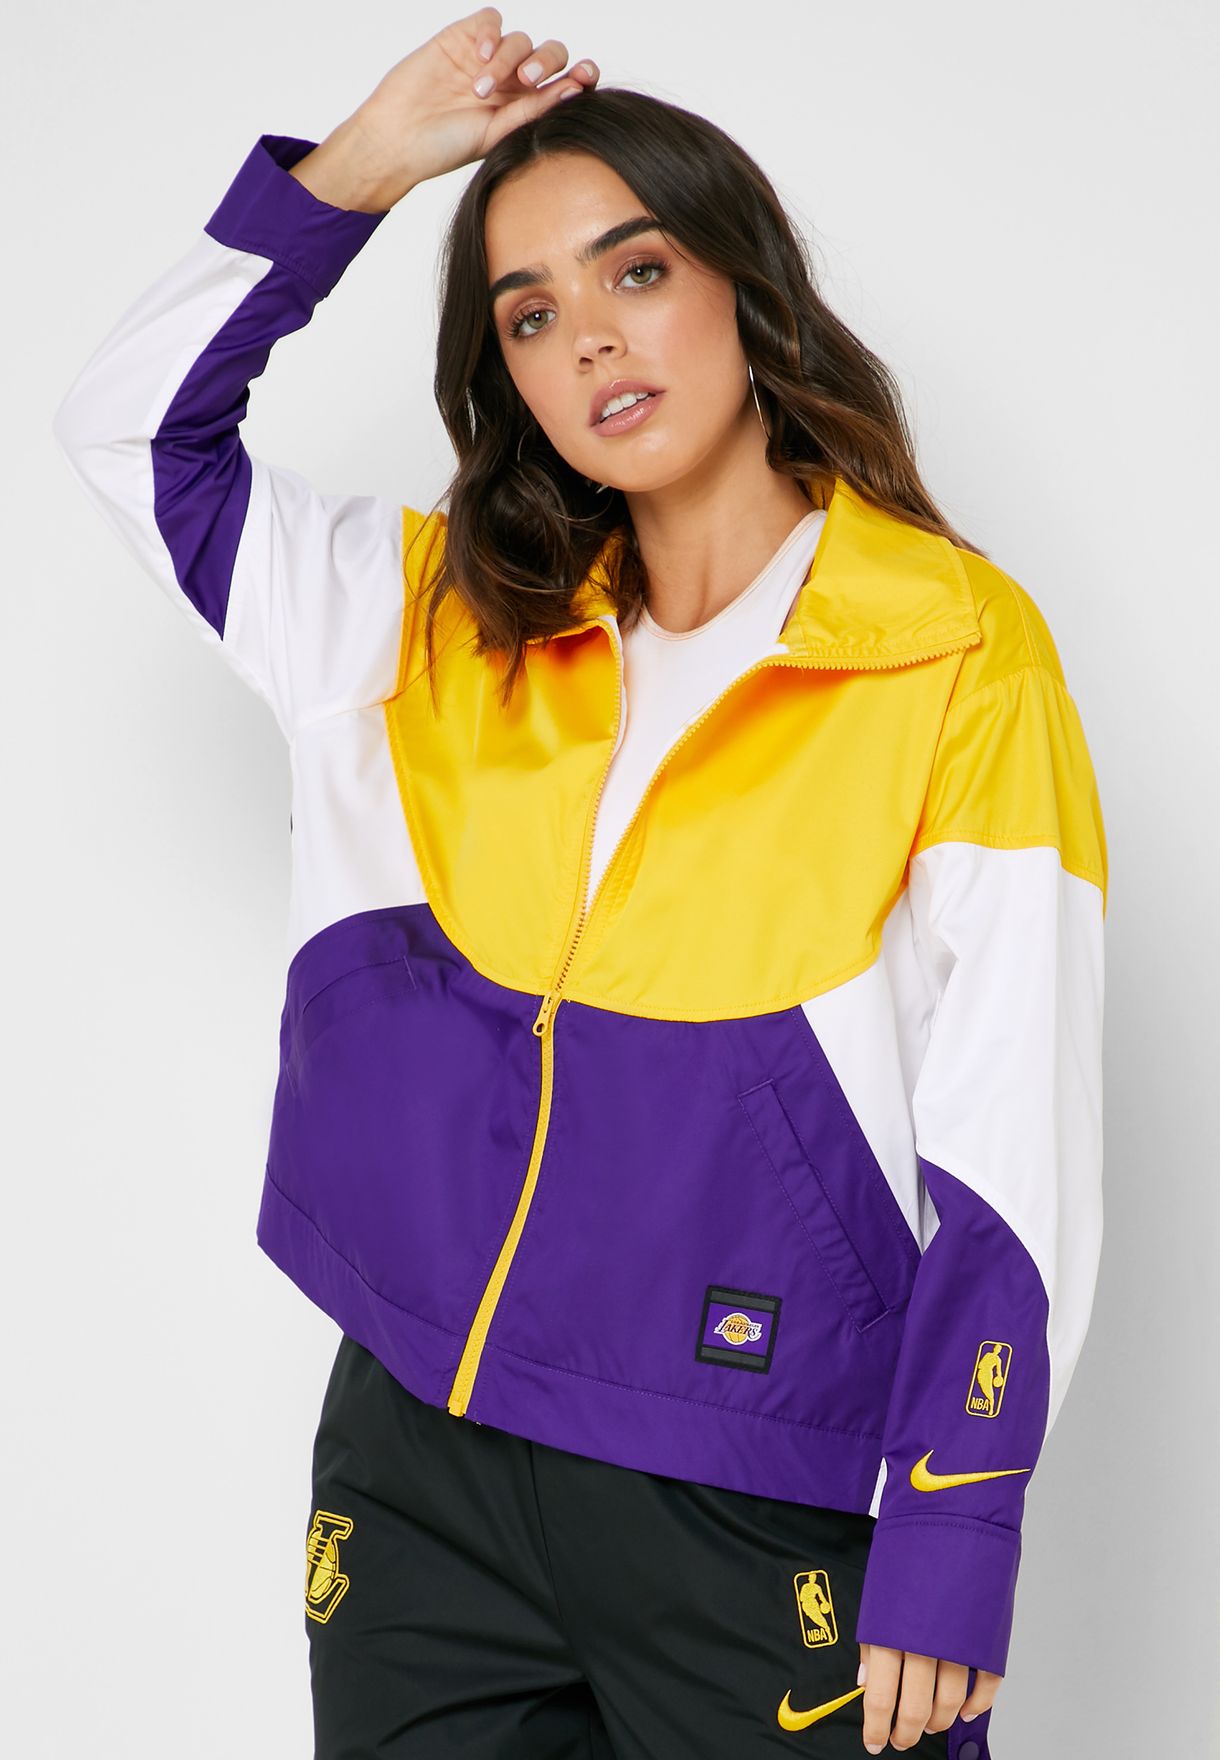 lakers women's outfit